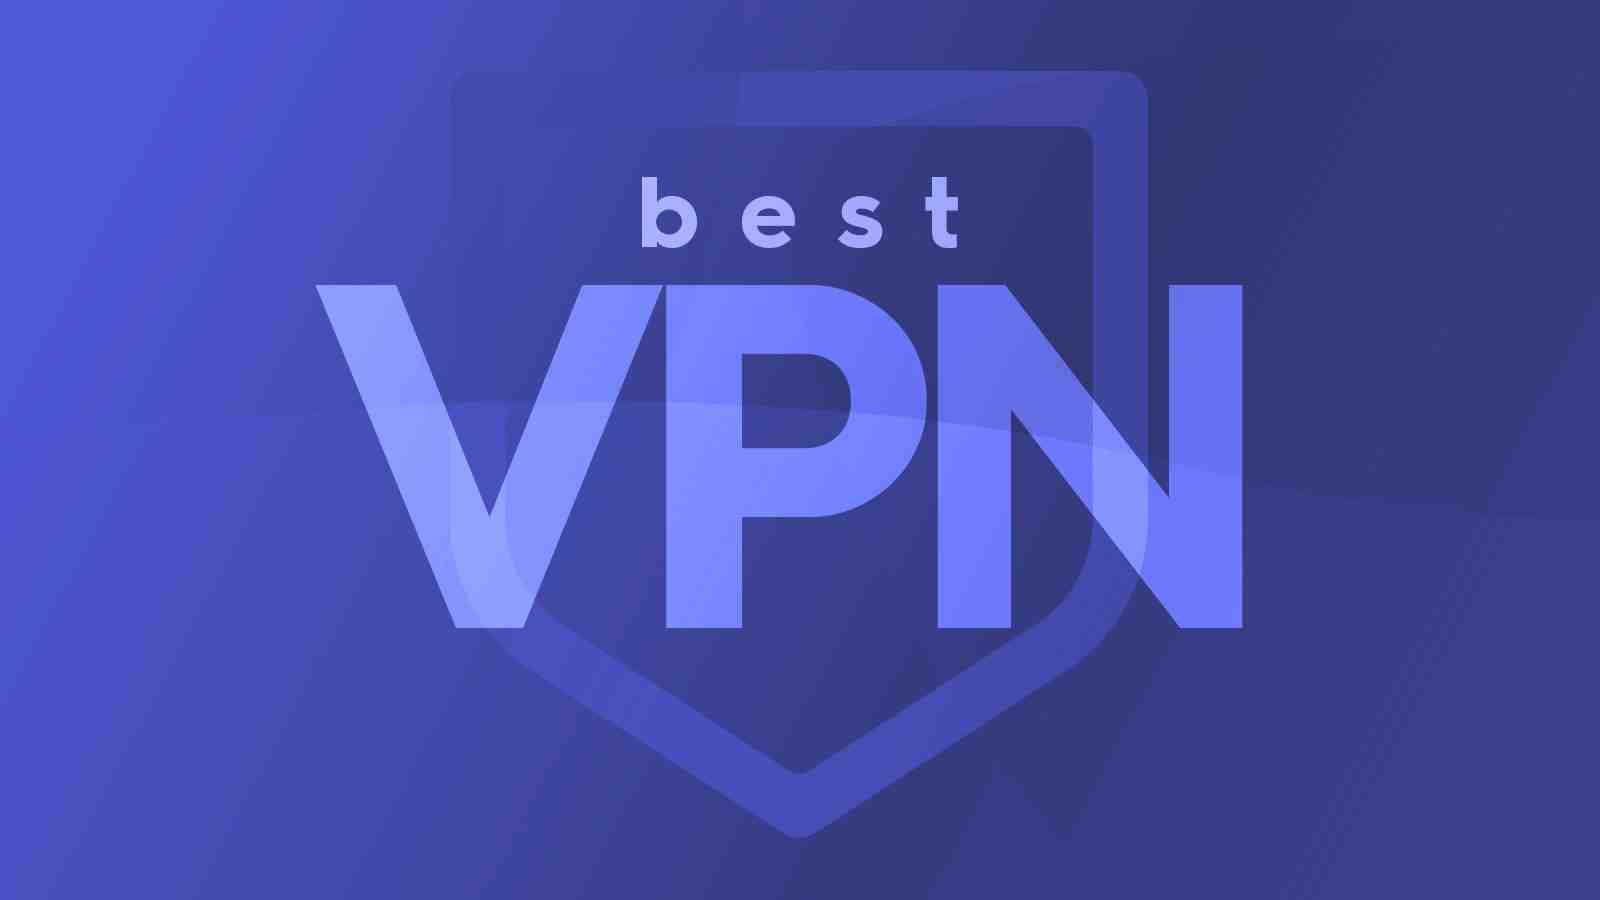 What 4 types of VPN are there?